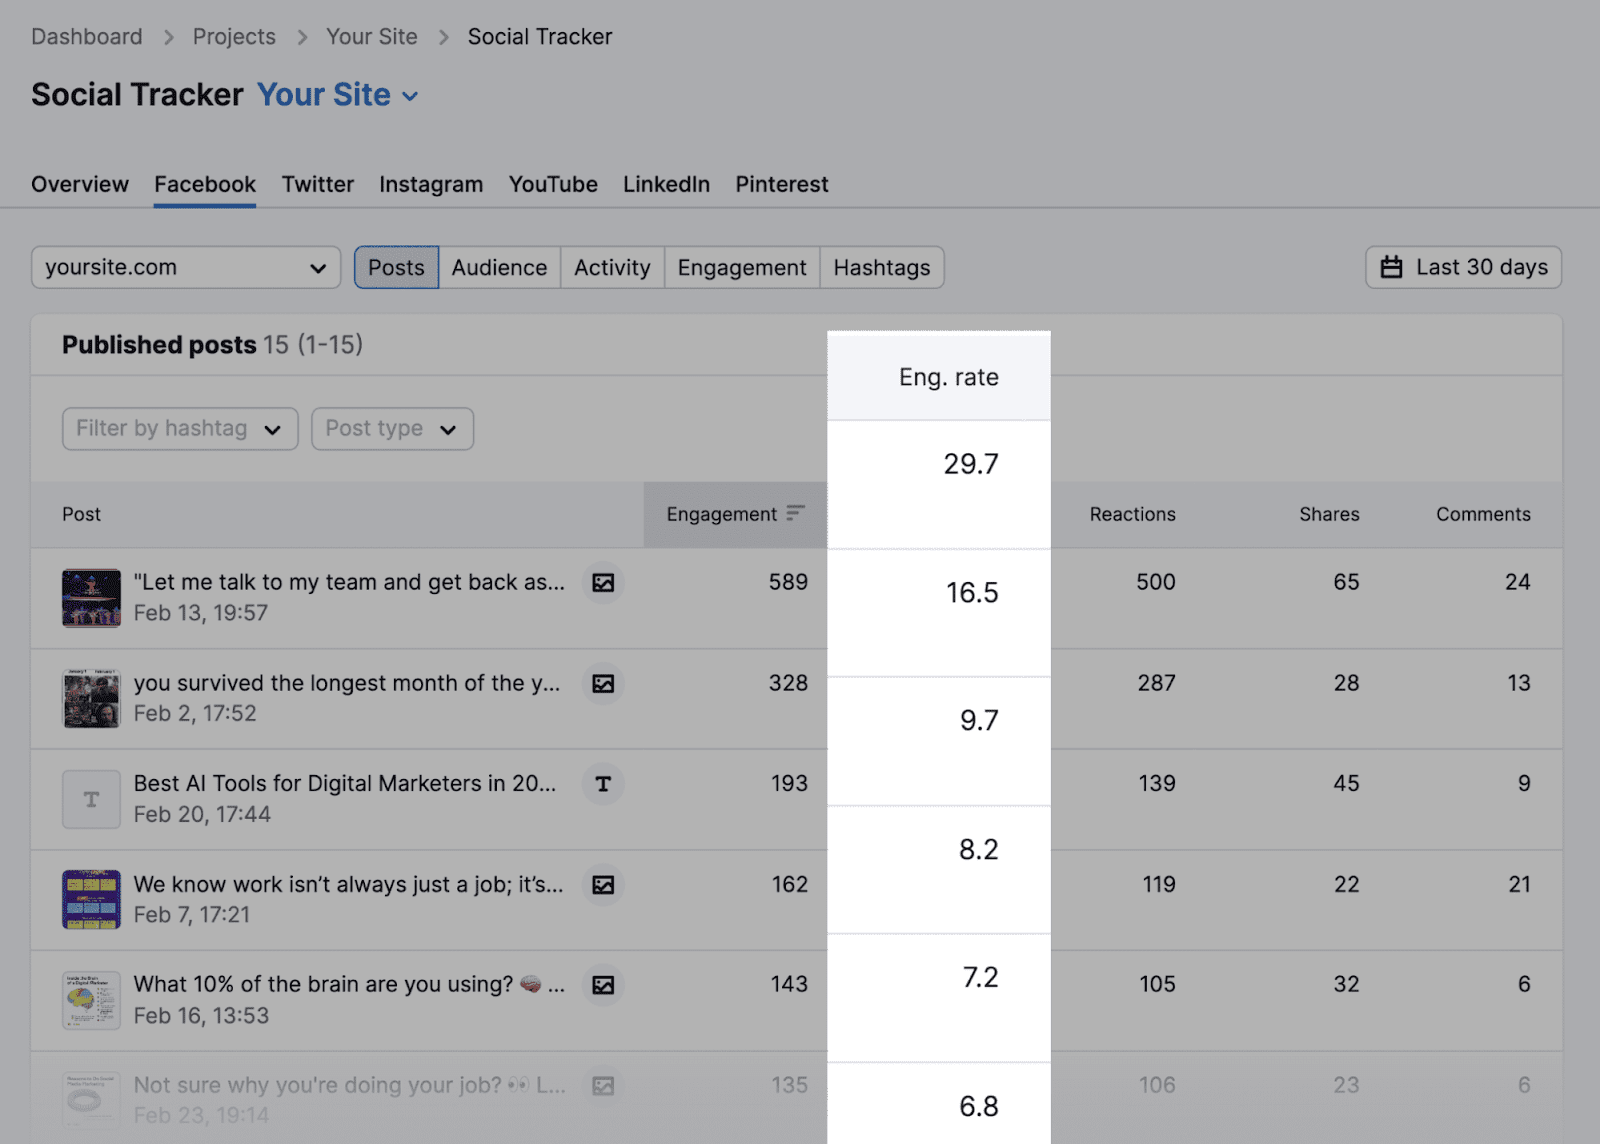 Engagement rate metrics highlighted for Facebook posts in Social Tracker tool